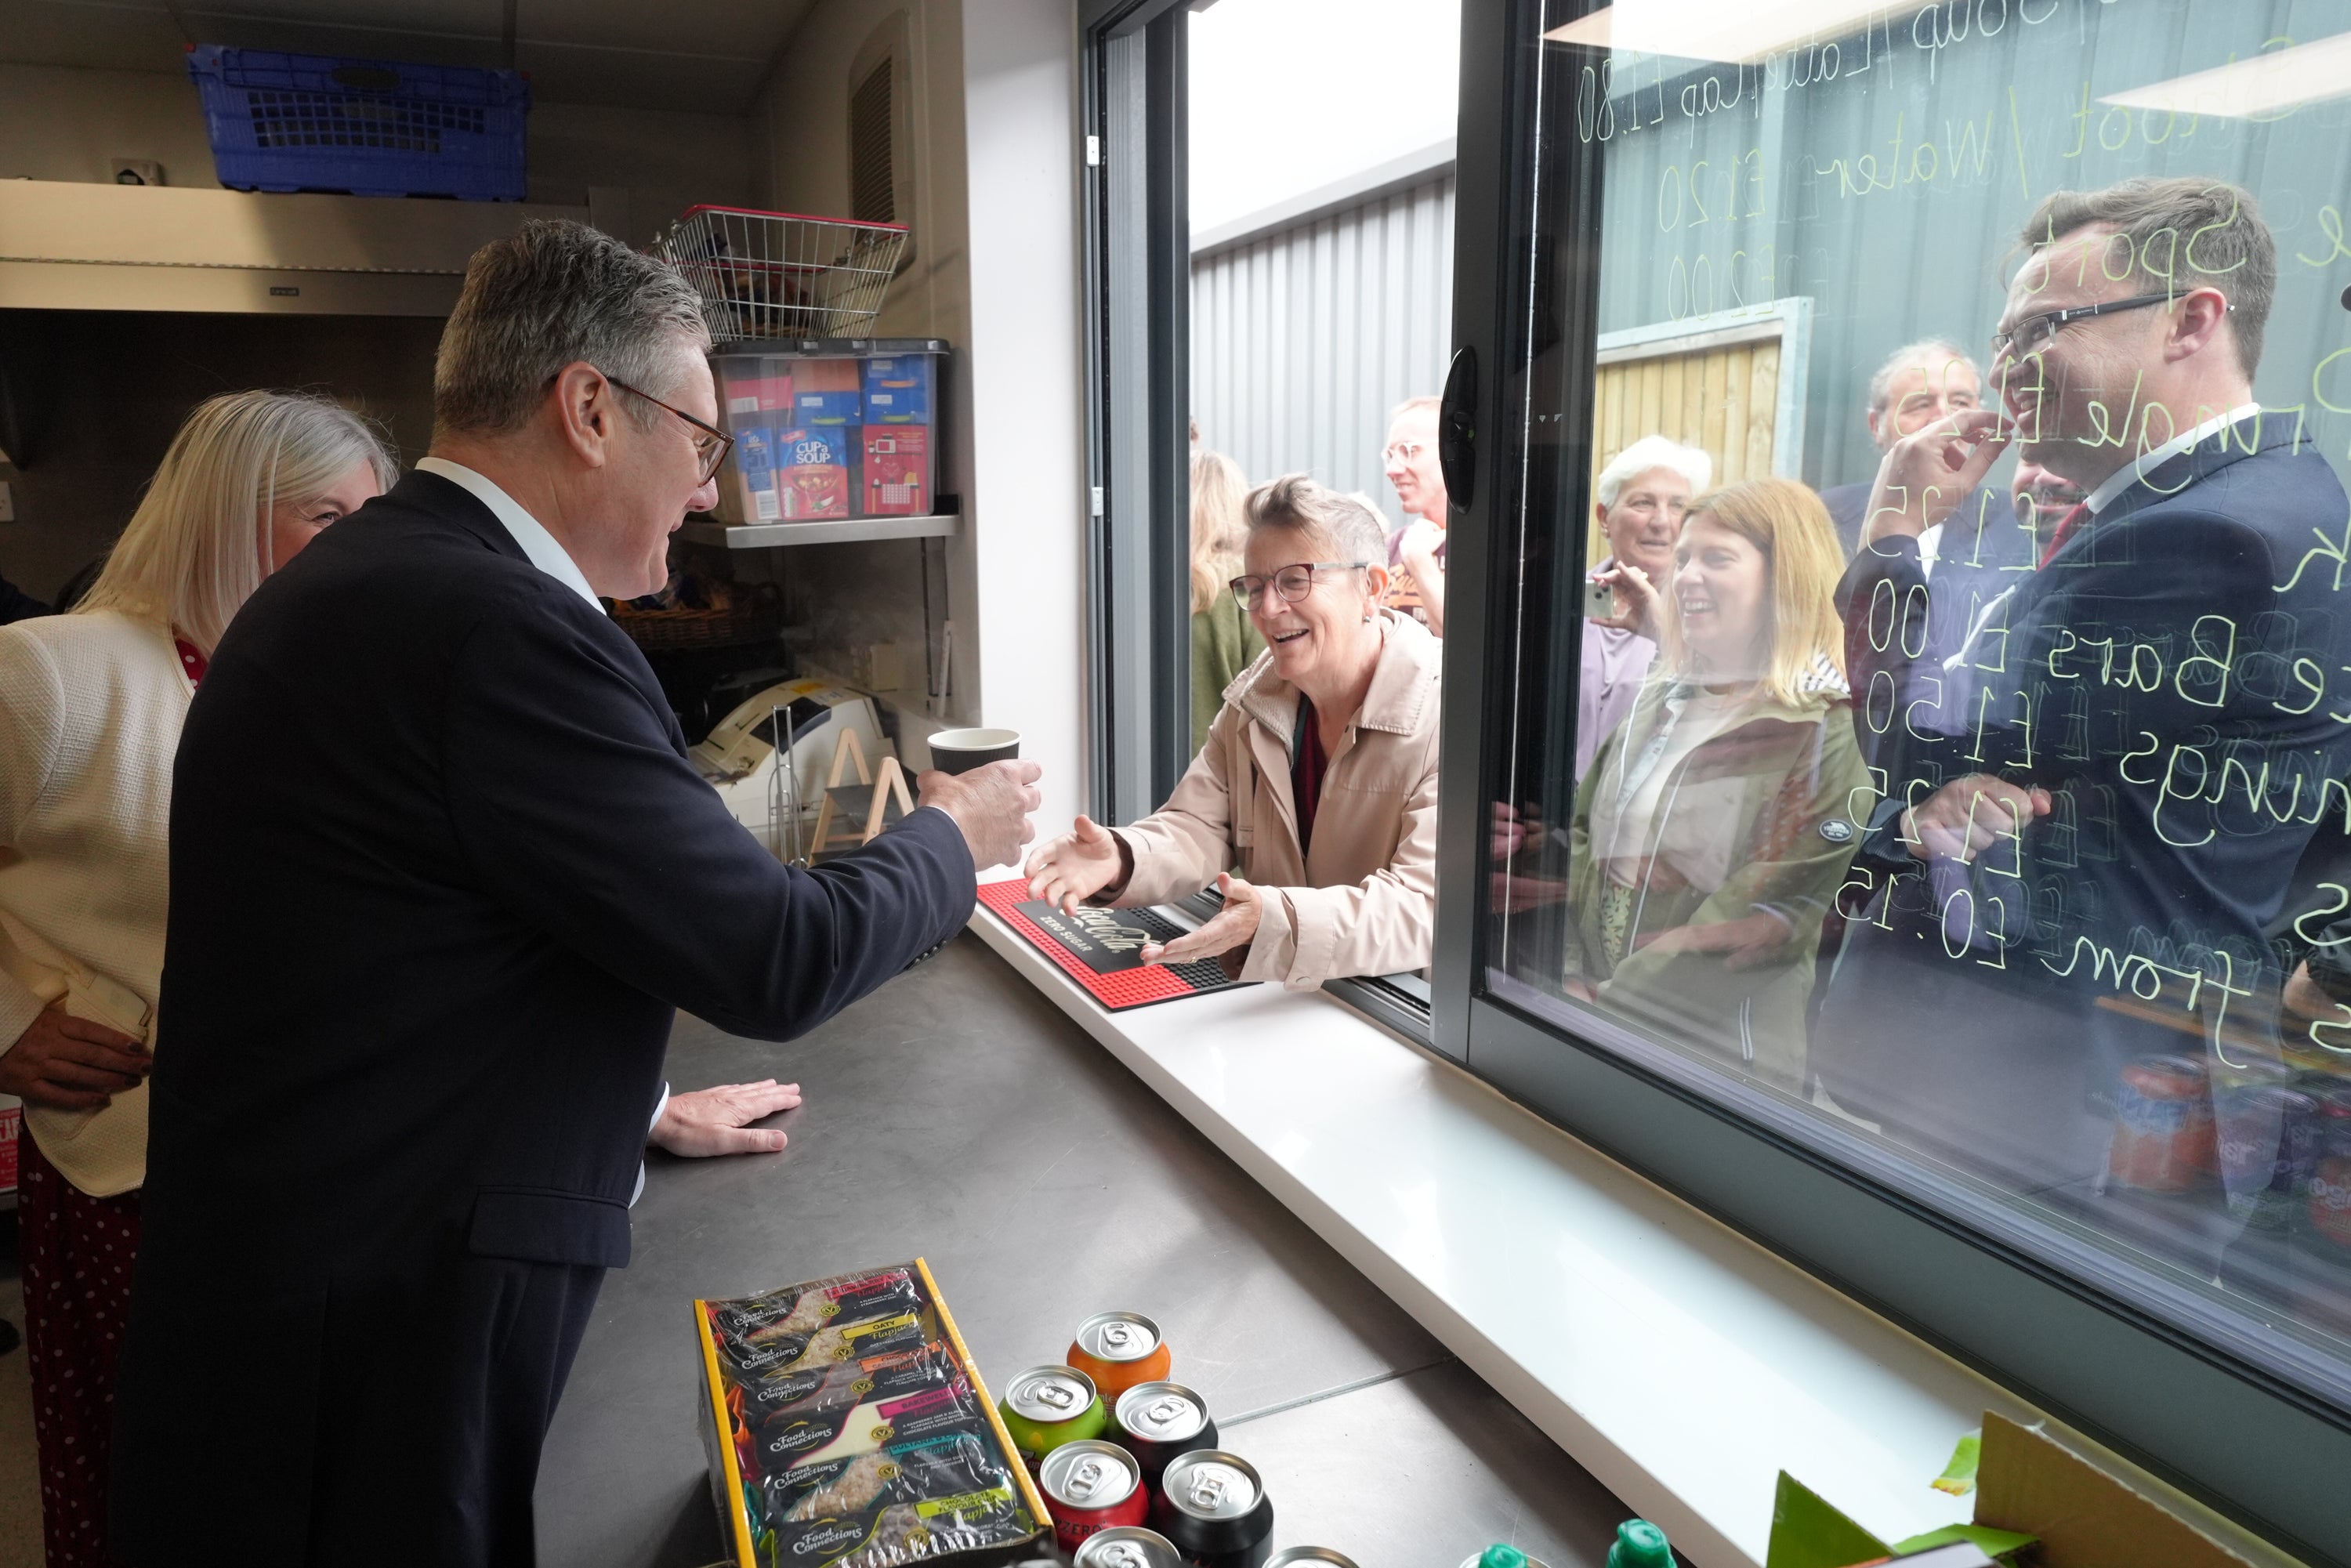 Sir Keir Starmer serves customers hot beverages during a visit to Hucknall Town FC in Nottinghamshire